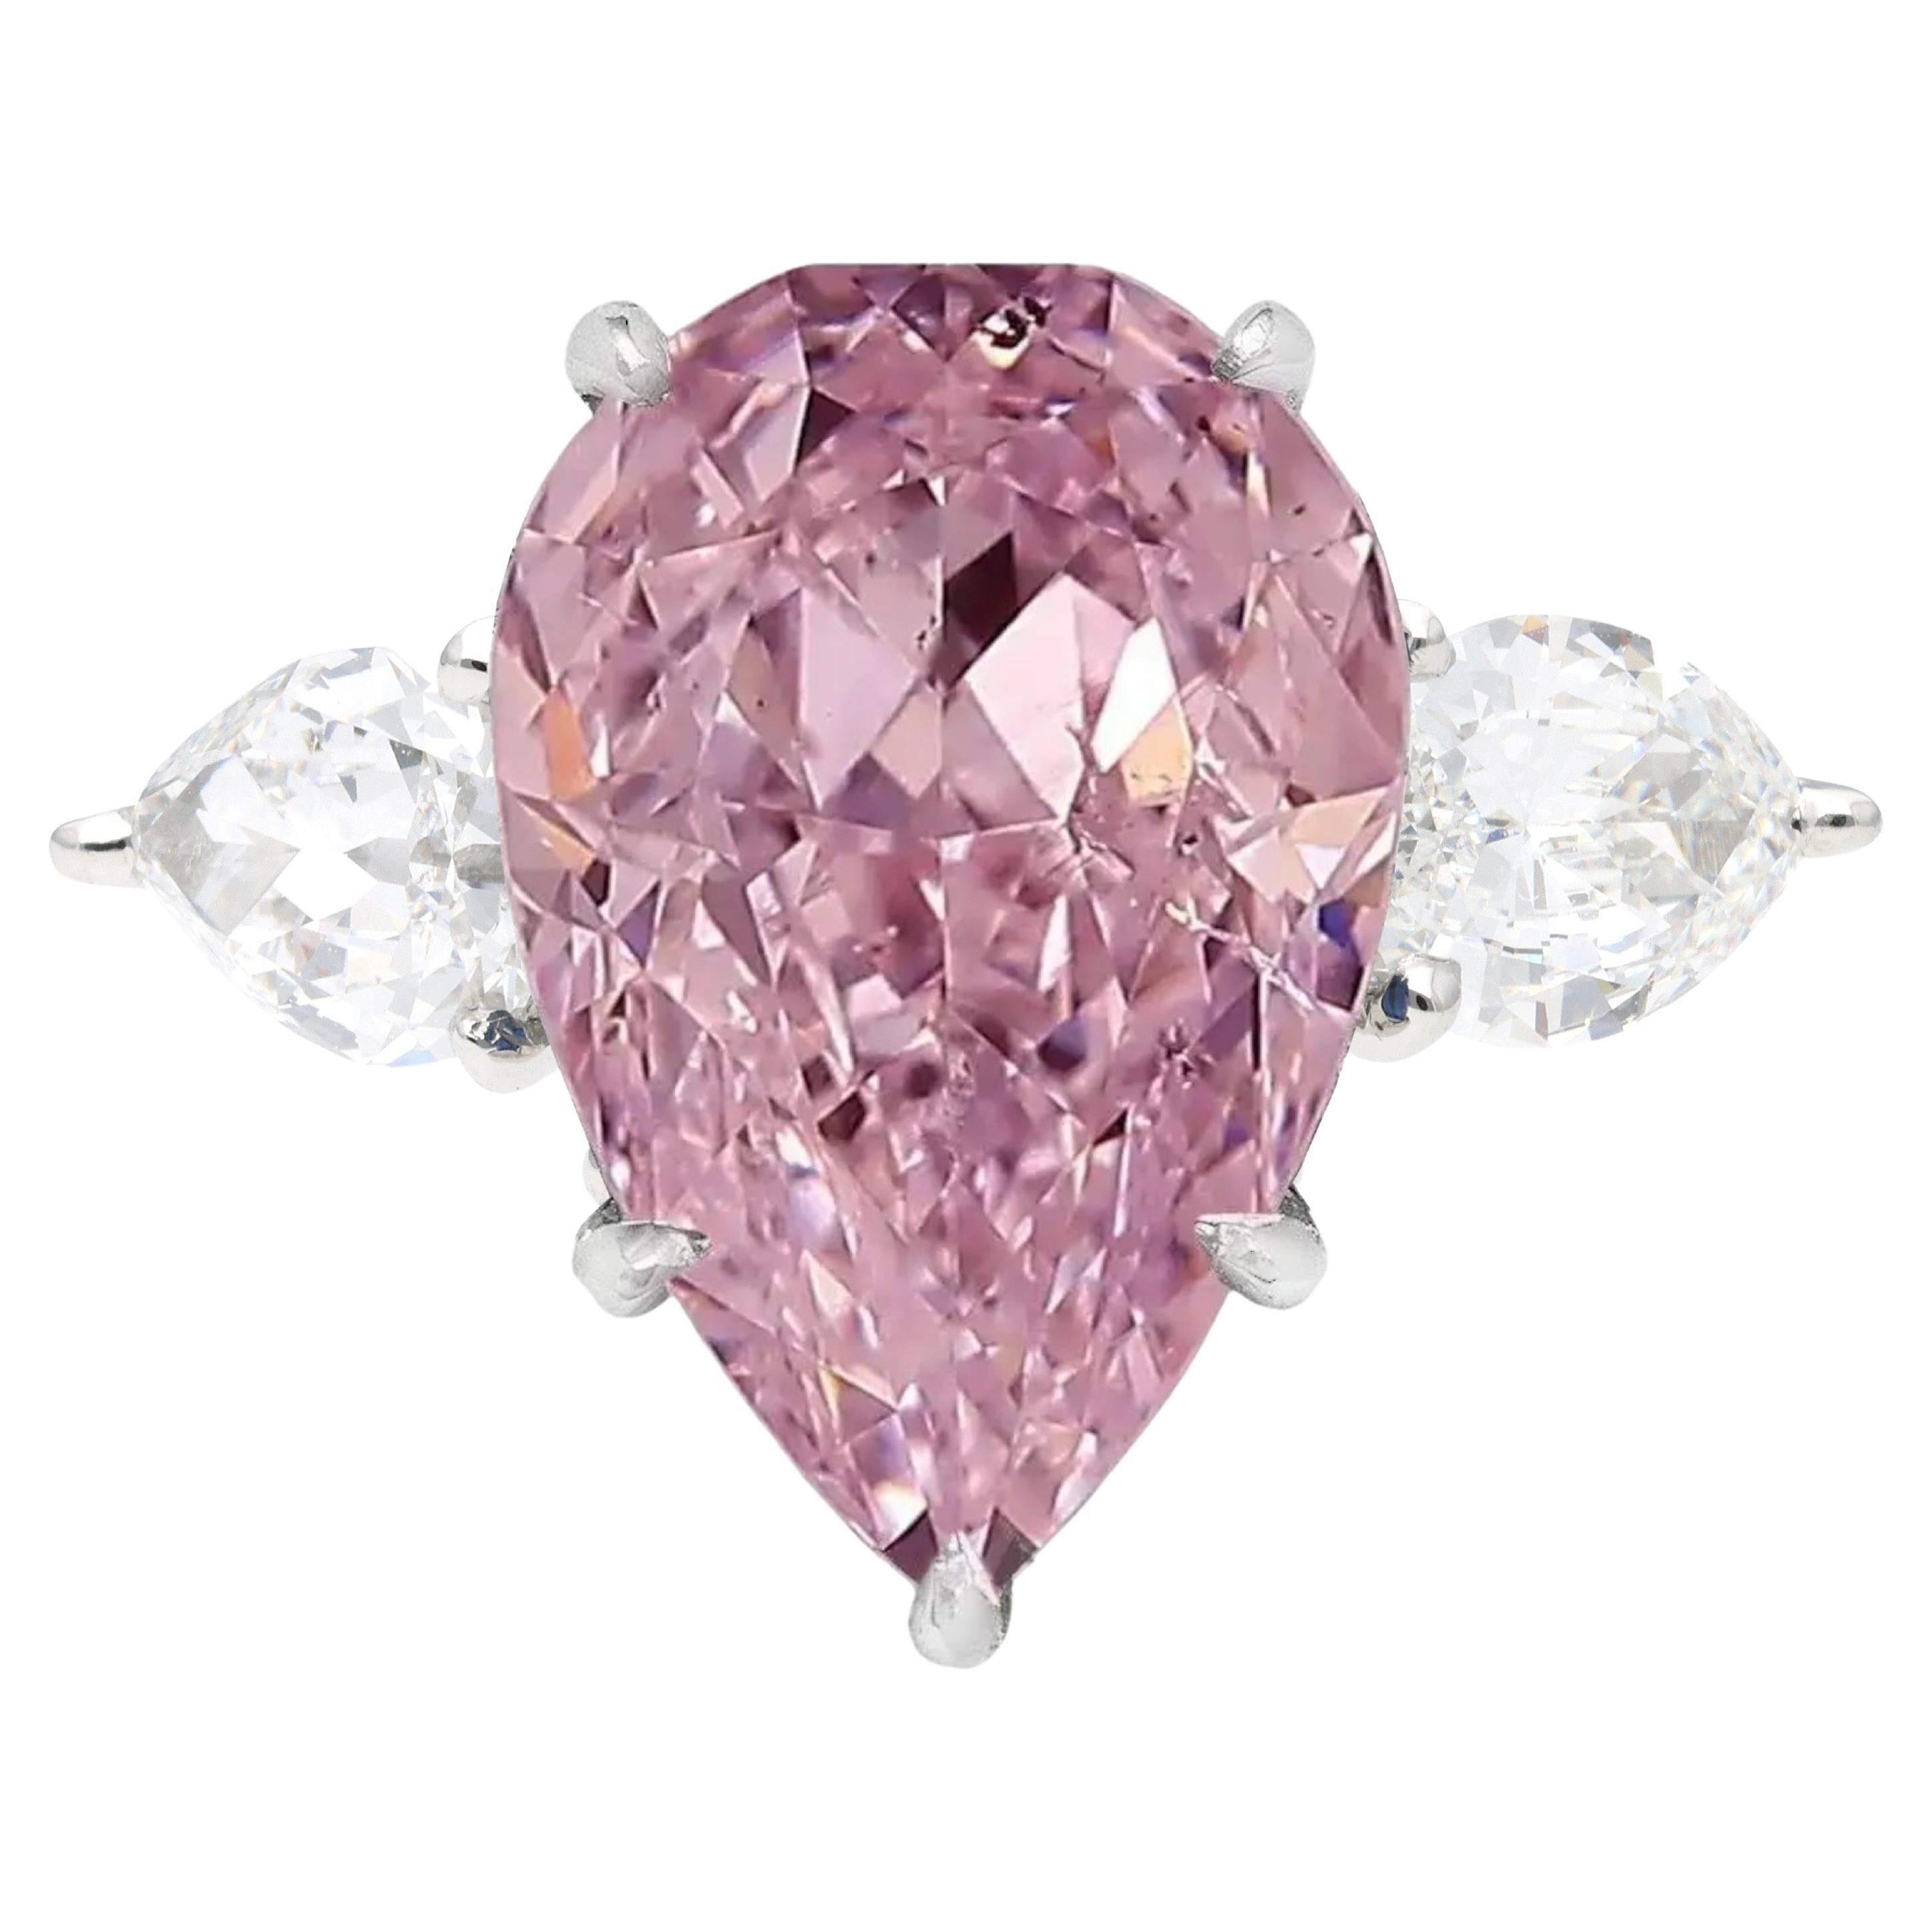 Exceptional GIA Certified 2 Carat Fancy Light Brown Pink Diamond Ring For Sale